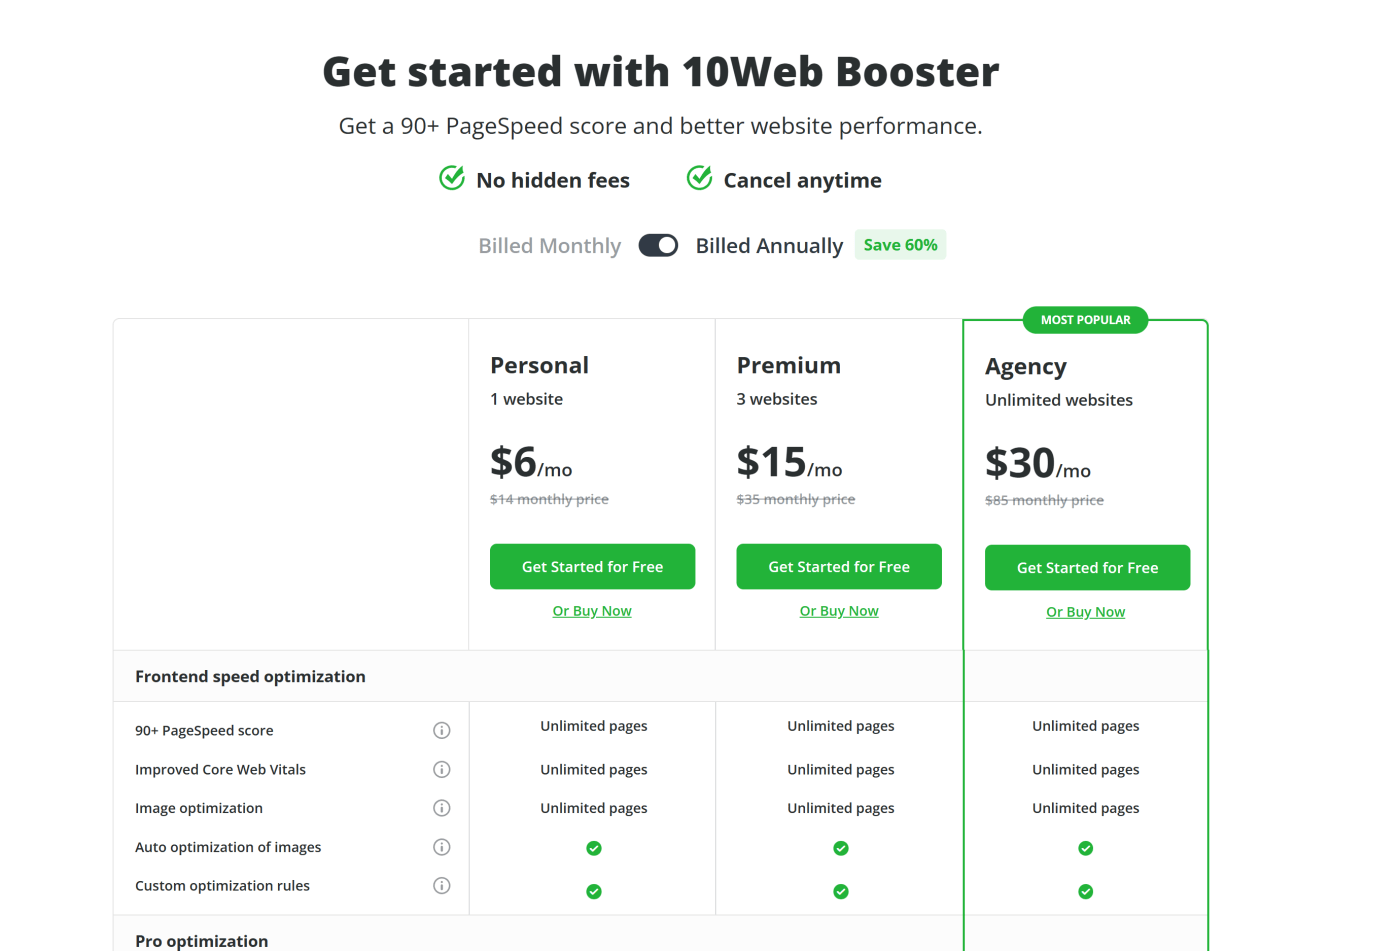 10web Booster Plans and Pricing